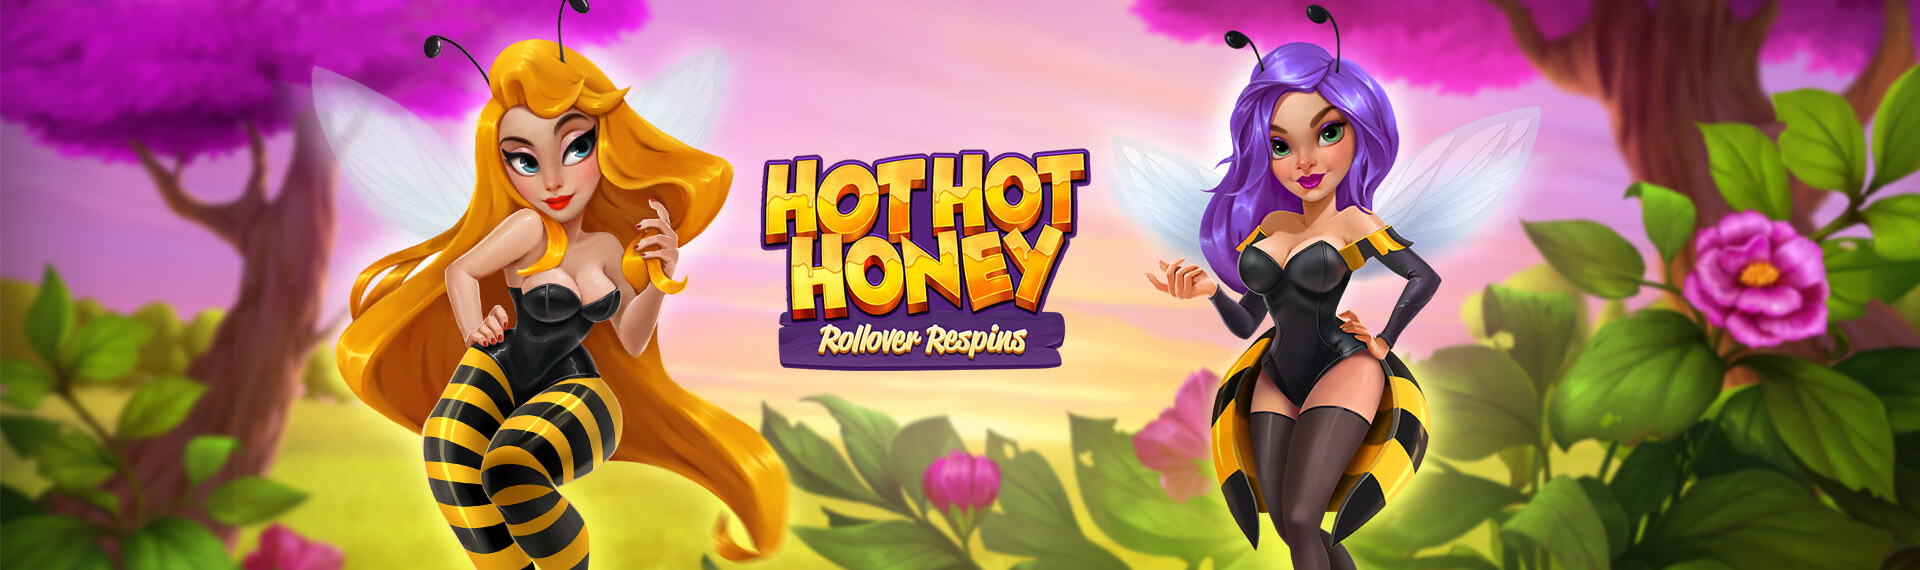 Hot Hot Honey Screenshot <br />
<b>Notice</b>:  Undefined variable: key in <b>/var/www/html/wp-content/themes/armadillo/page-game.php</b> on line <b>37</b><br />
1